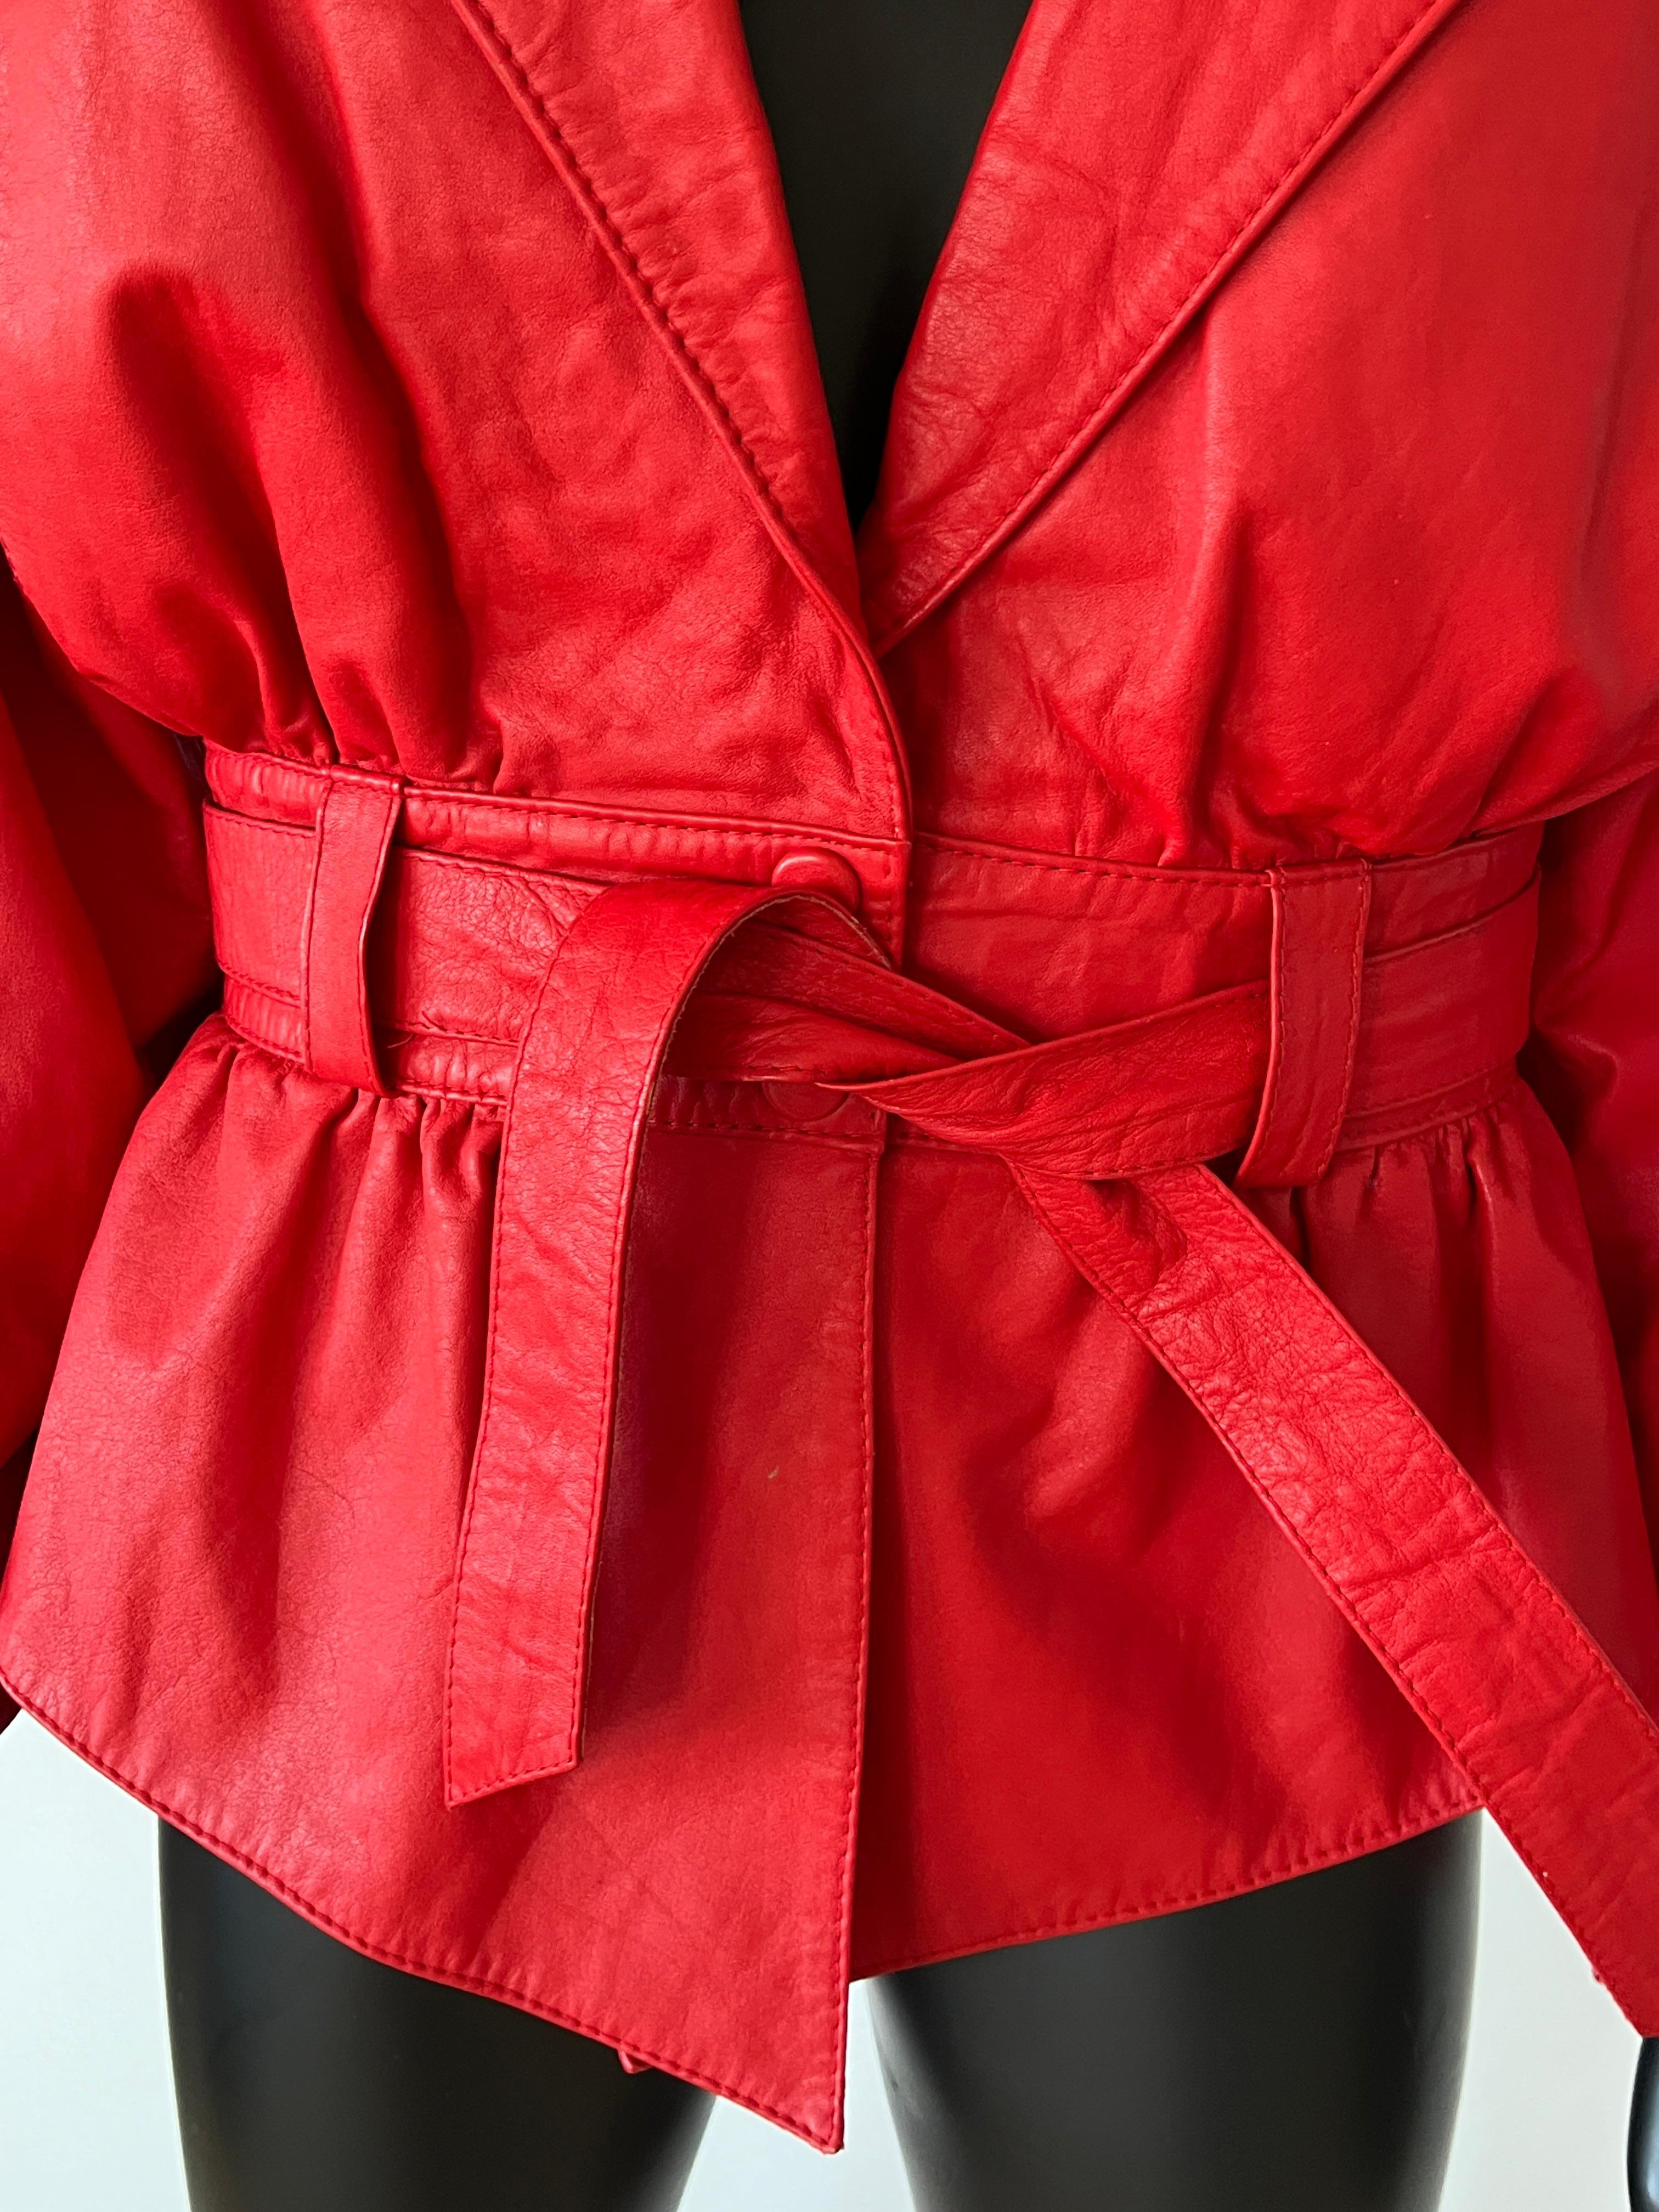 Women's 1980s Red Leather Jacket For Sale